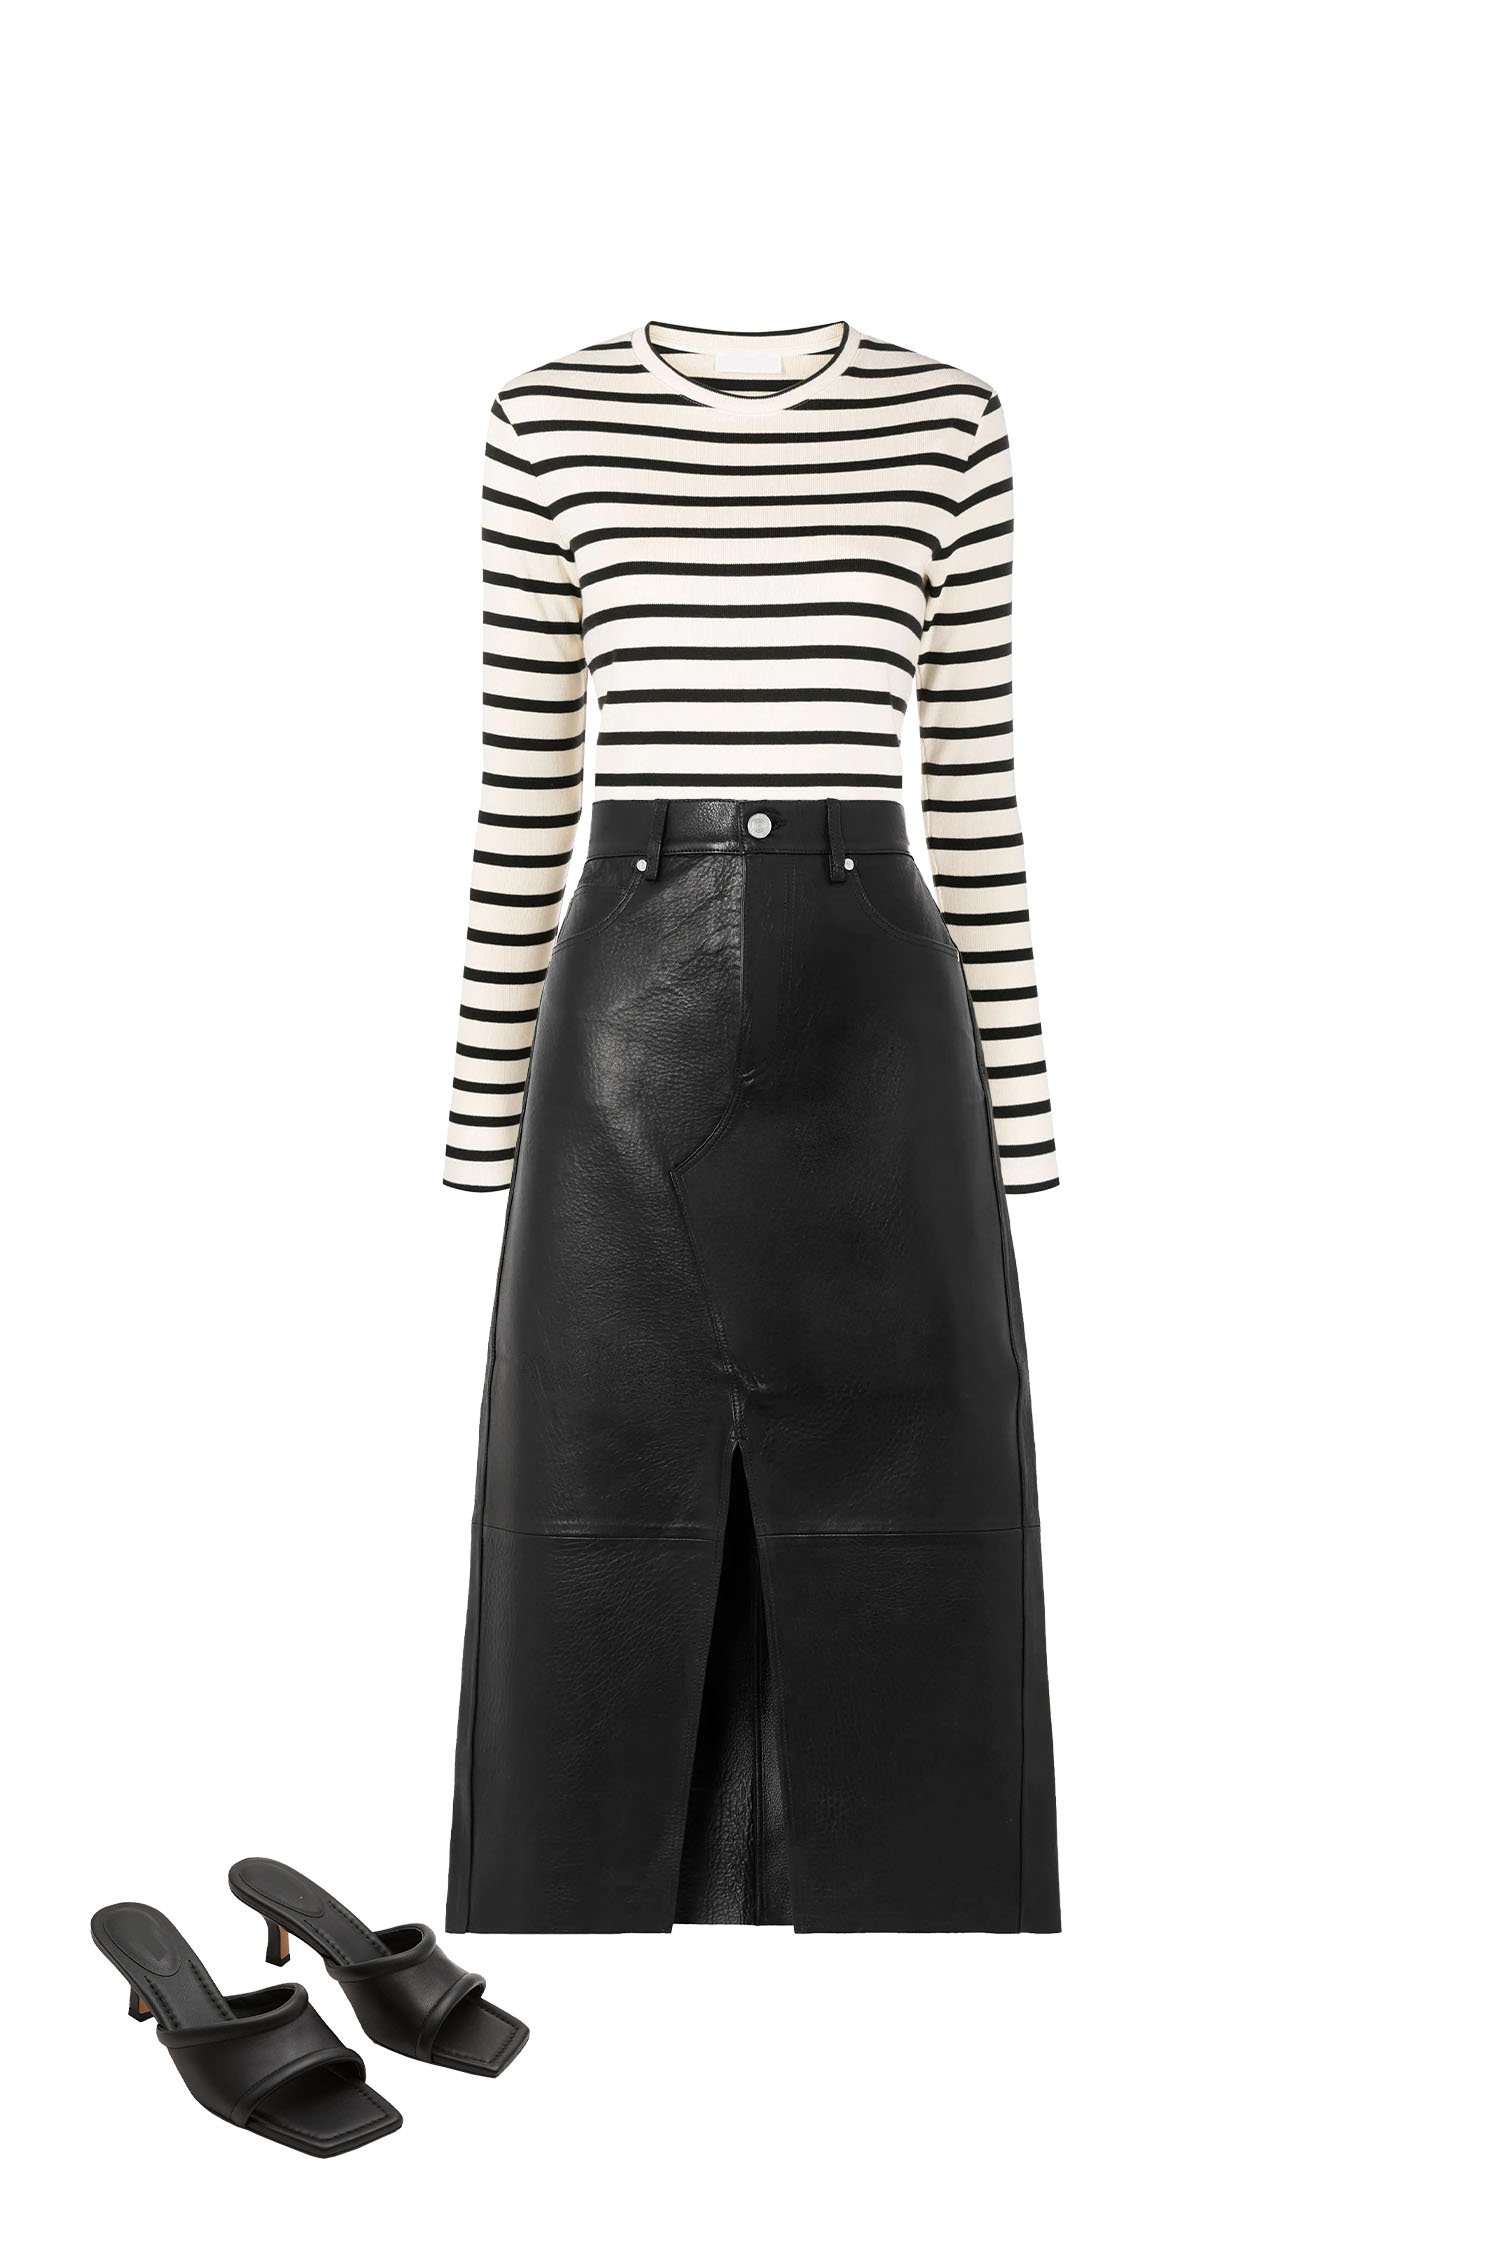 Black Leather Midi Skirt Outfit with Cream and Black Stripe T-Shirt, and Black Square Toe Kitten Heel Sandals